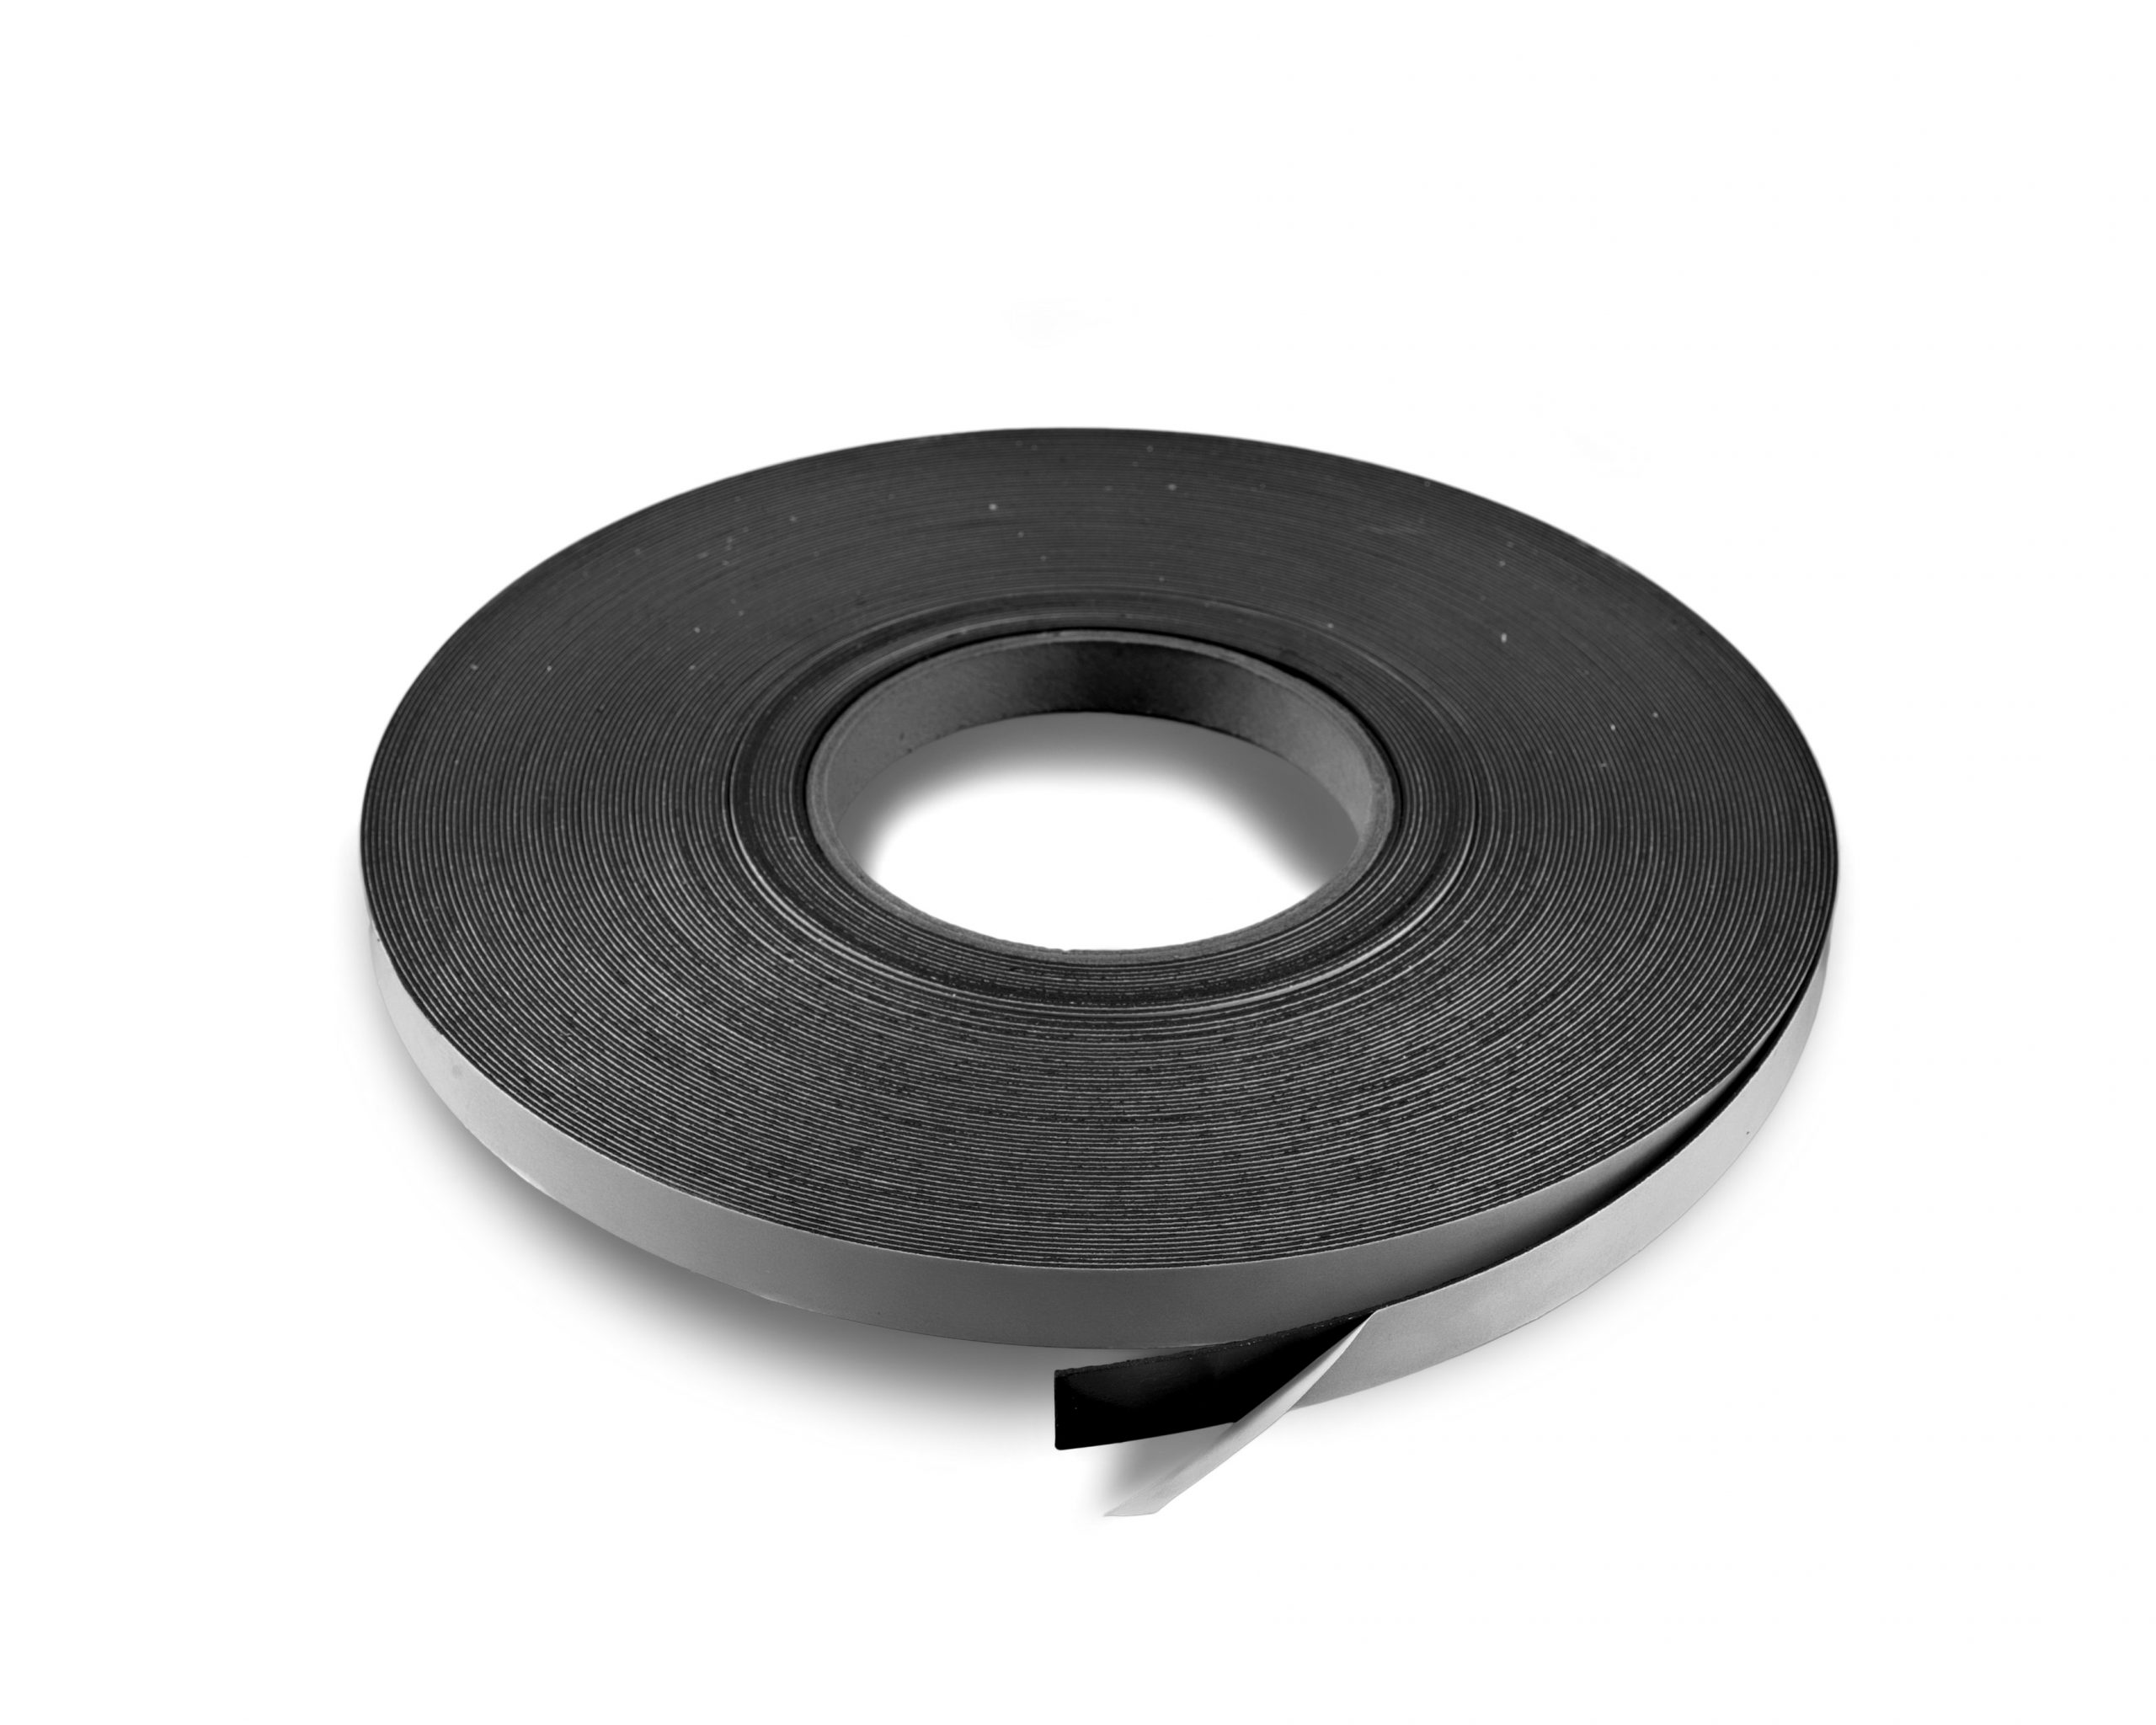 1 Acrylic Adhesive Magnetic Tape - 120 mil - Discount Magnet